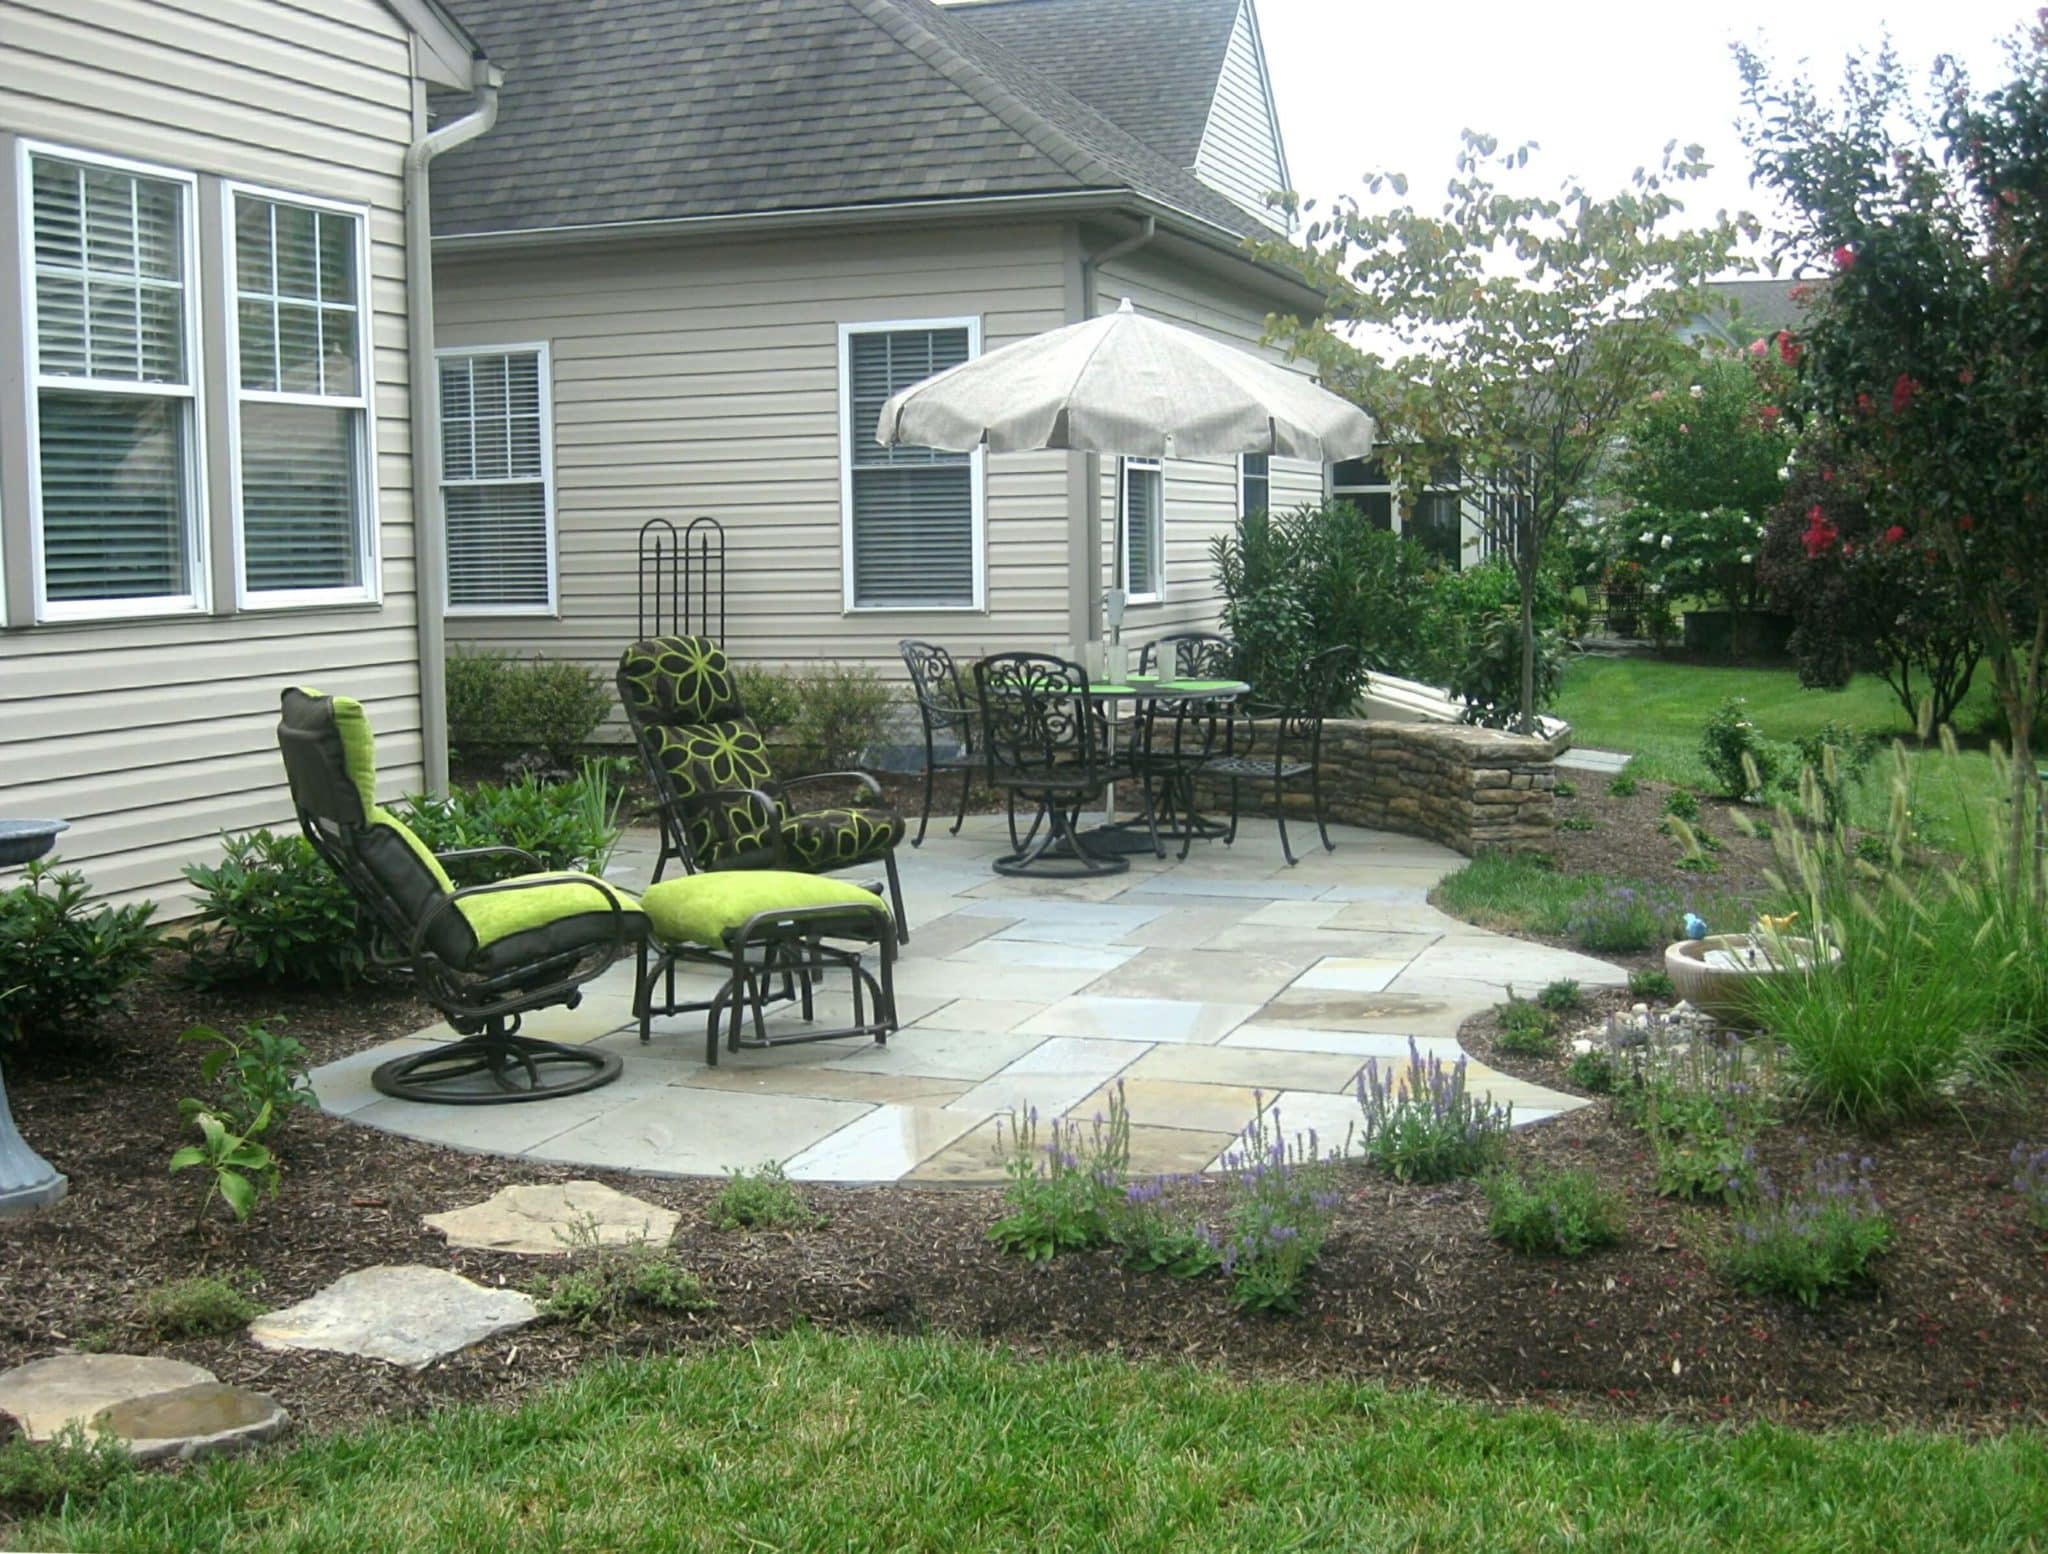 442 Flagstone Patio and Stone Sitting Wall